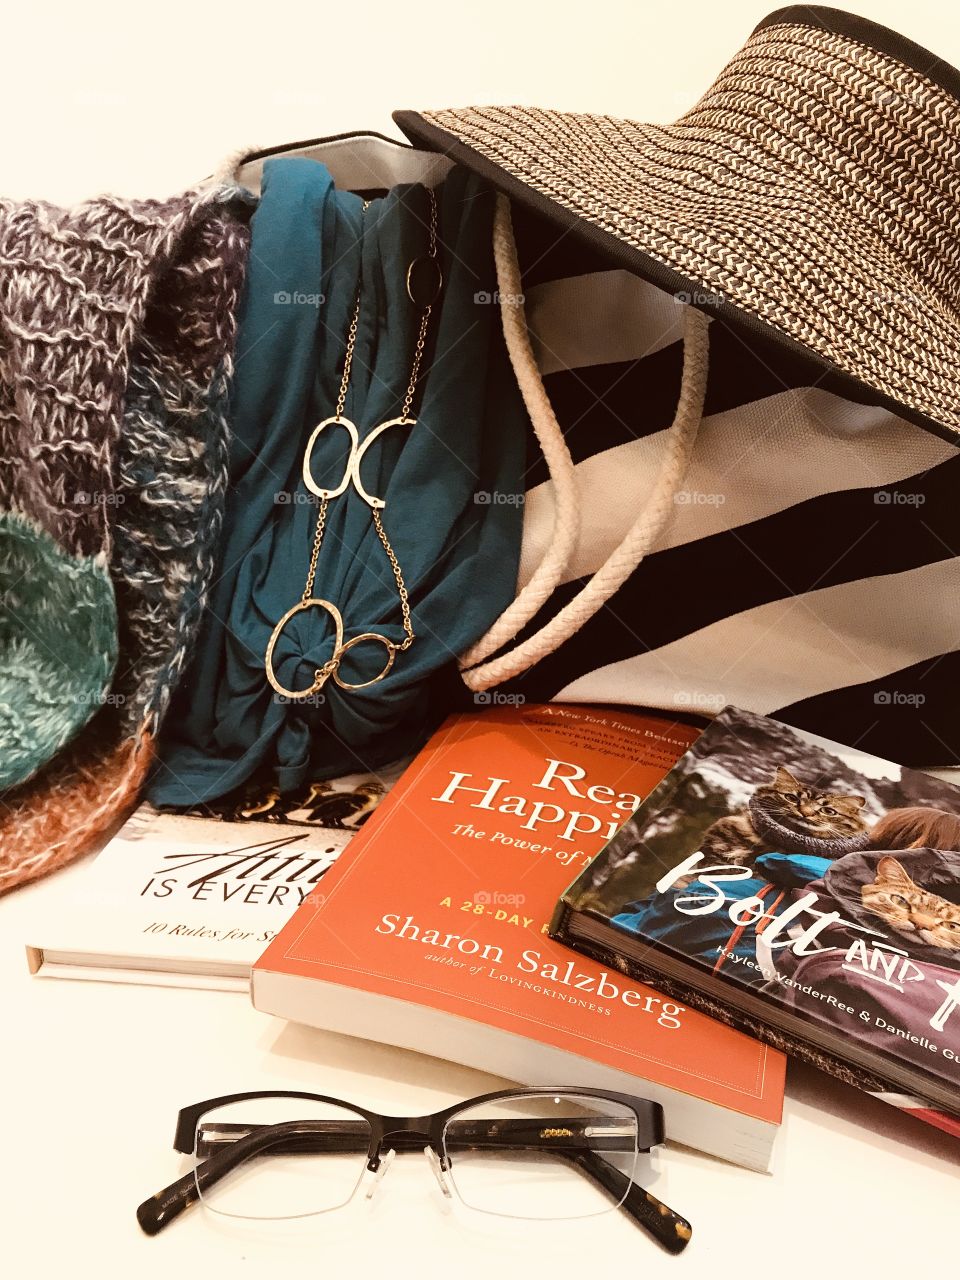 Let’s get ready to travel with best feel good reads, summer dress, sun hat, glasses, and favorite scarf! 